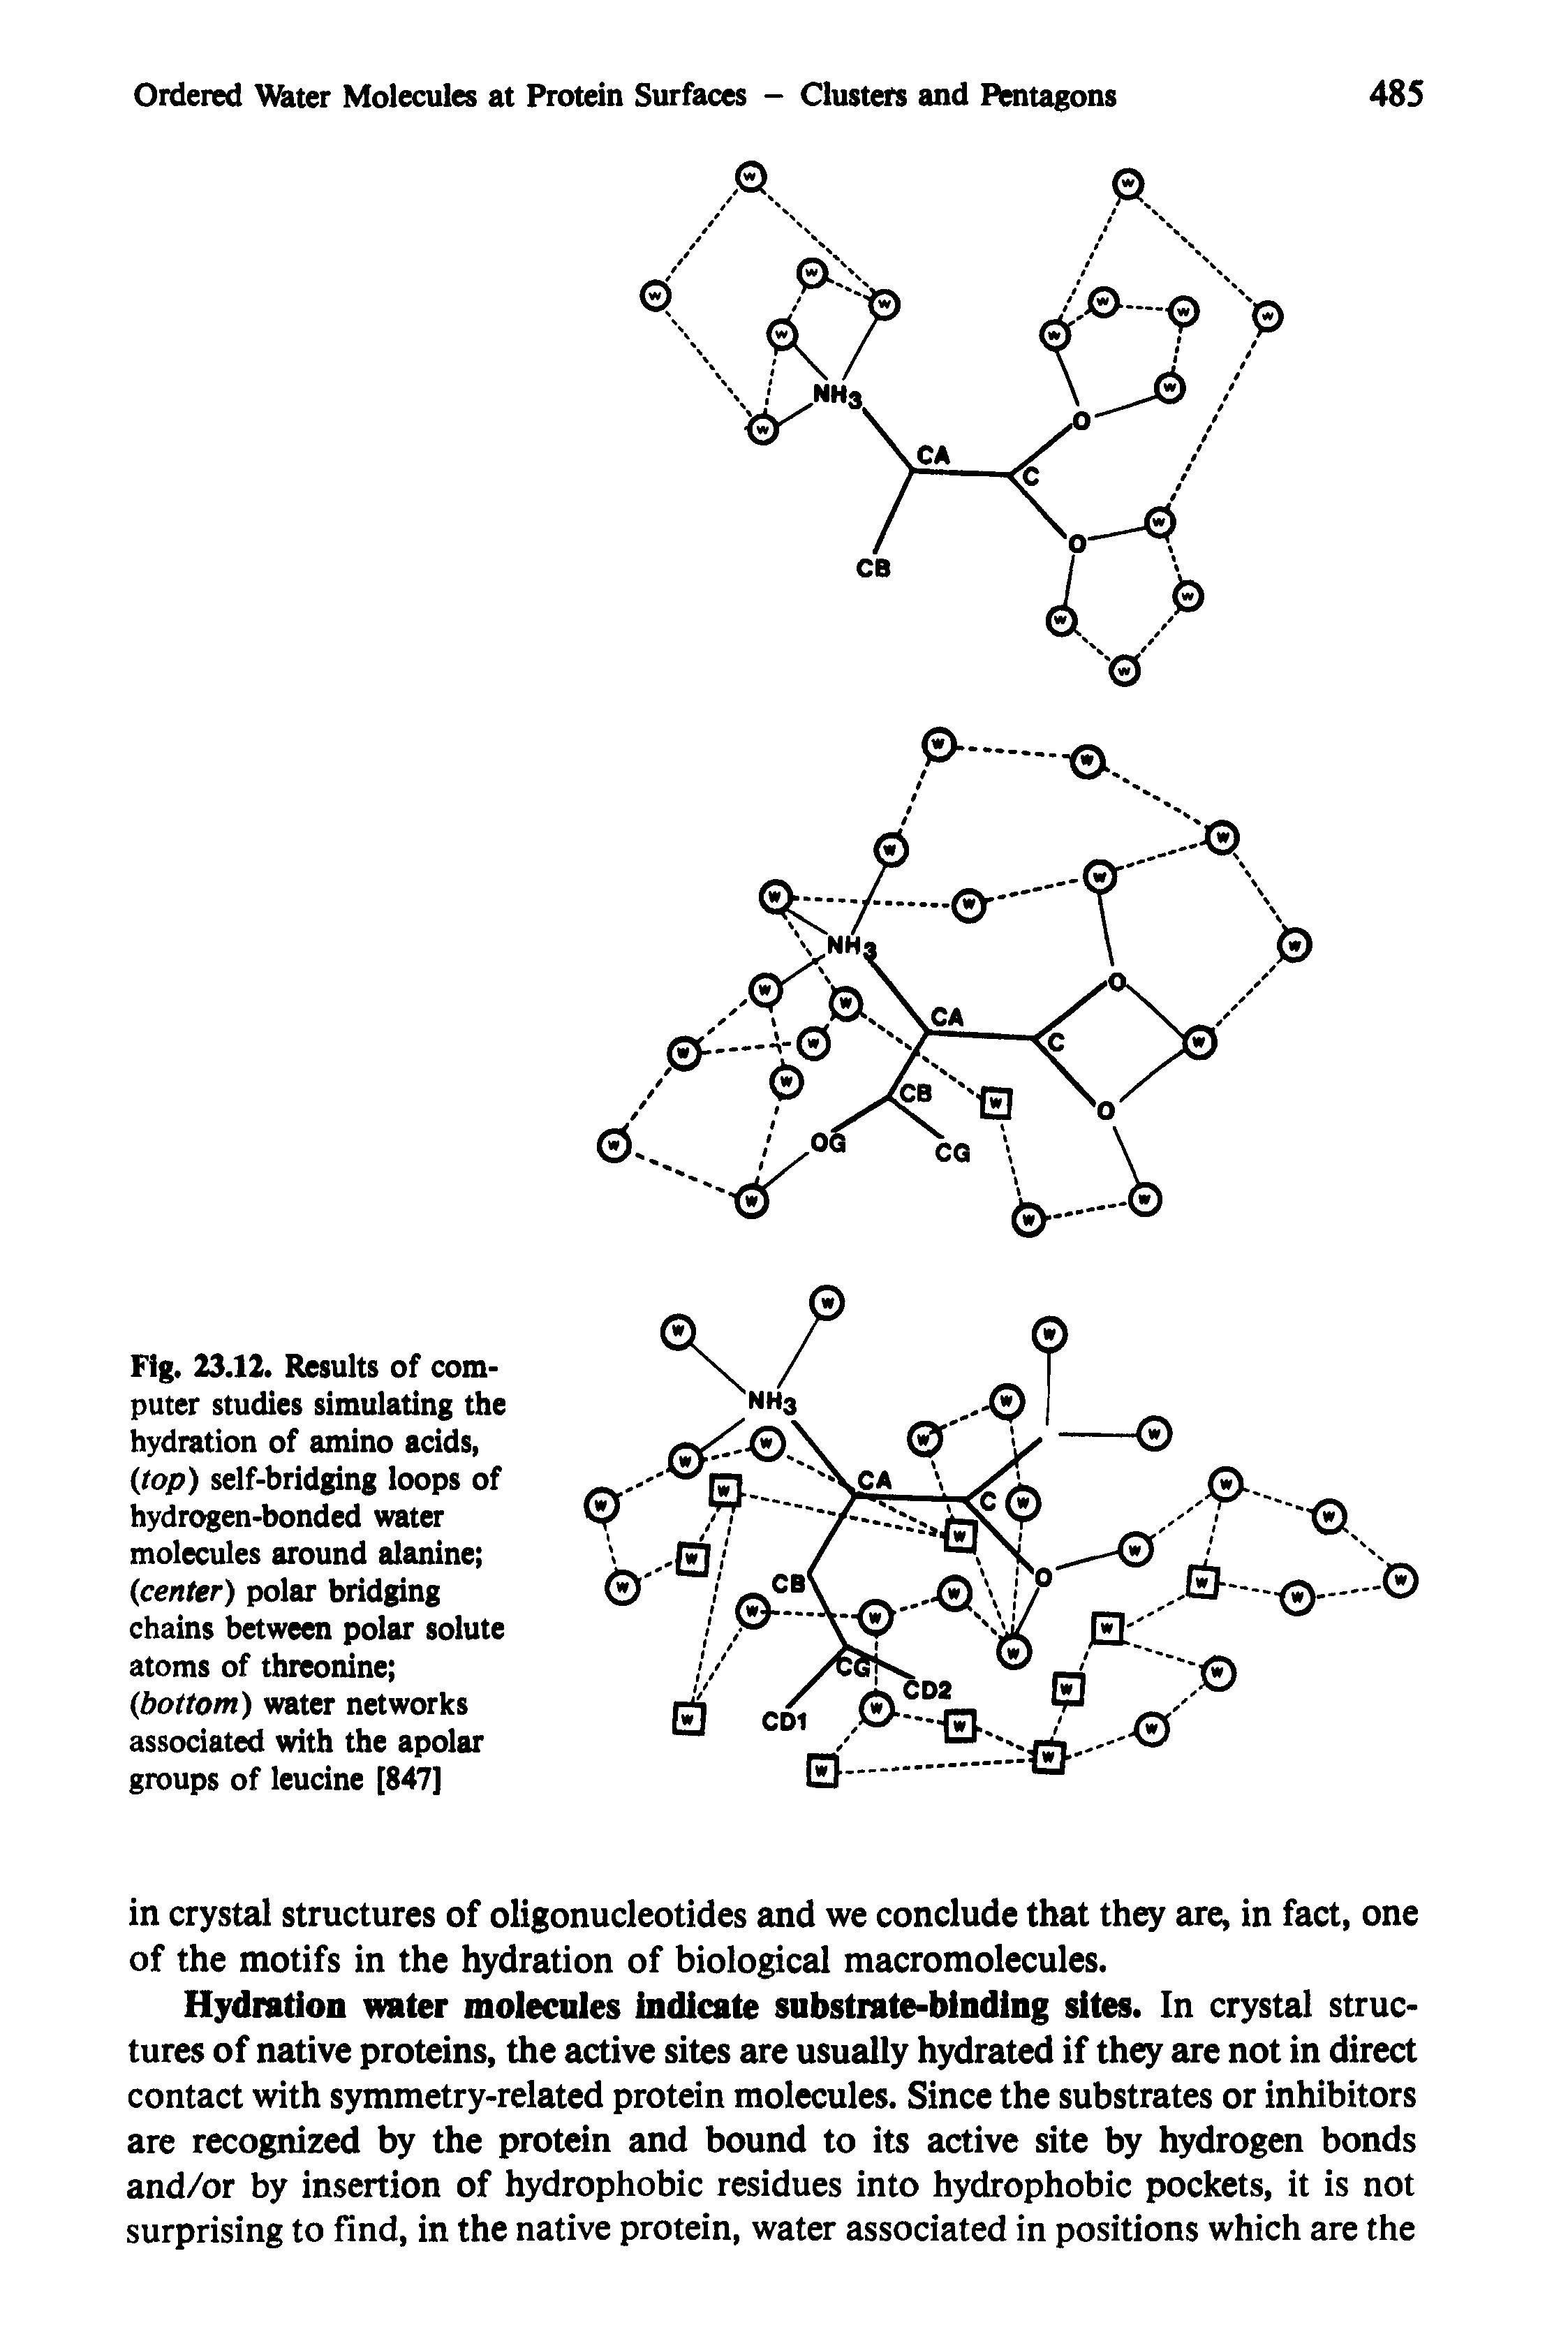 Fig. 23.12. Results of computer studies simulating the hydration of amino acids, (top) self-bridging loops of hydrogen-bonded water molecules around alanine (center) polar bridging chains between polar solute atoms of threonine (bottom) water networks associated with the apolar groups of leucine [847]...